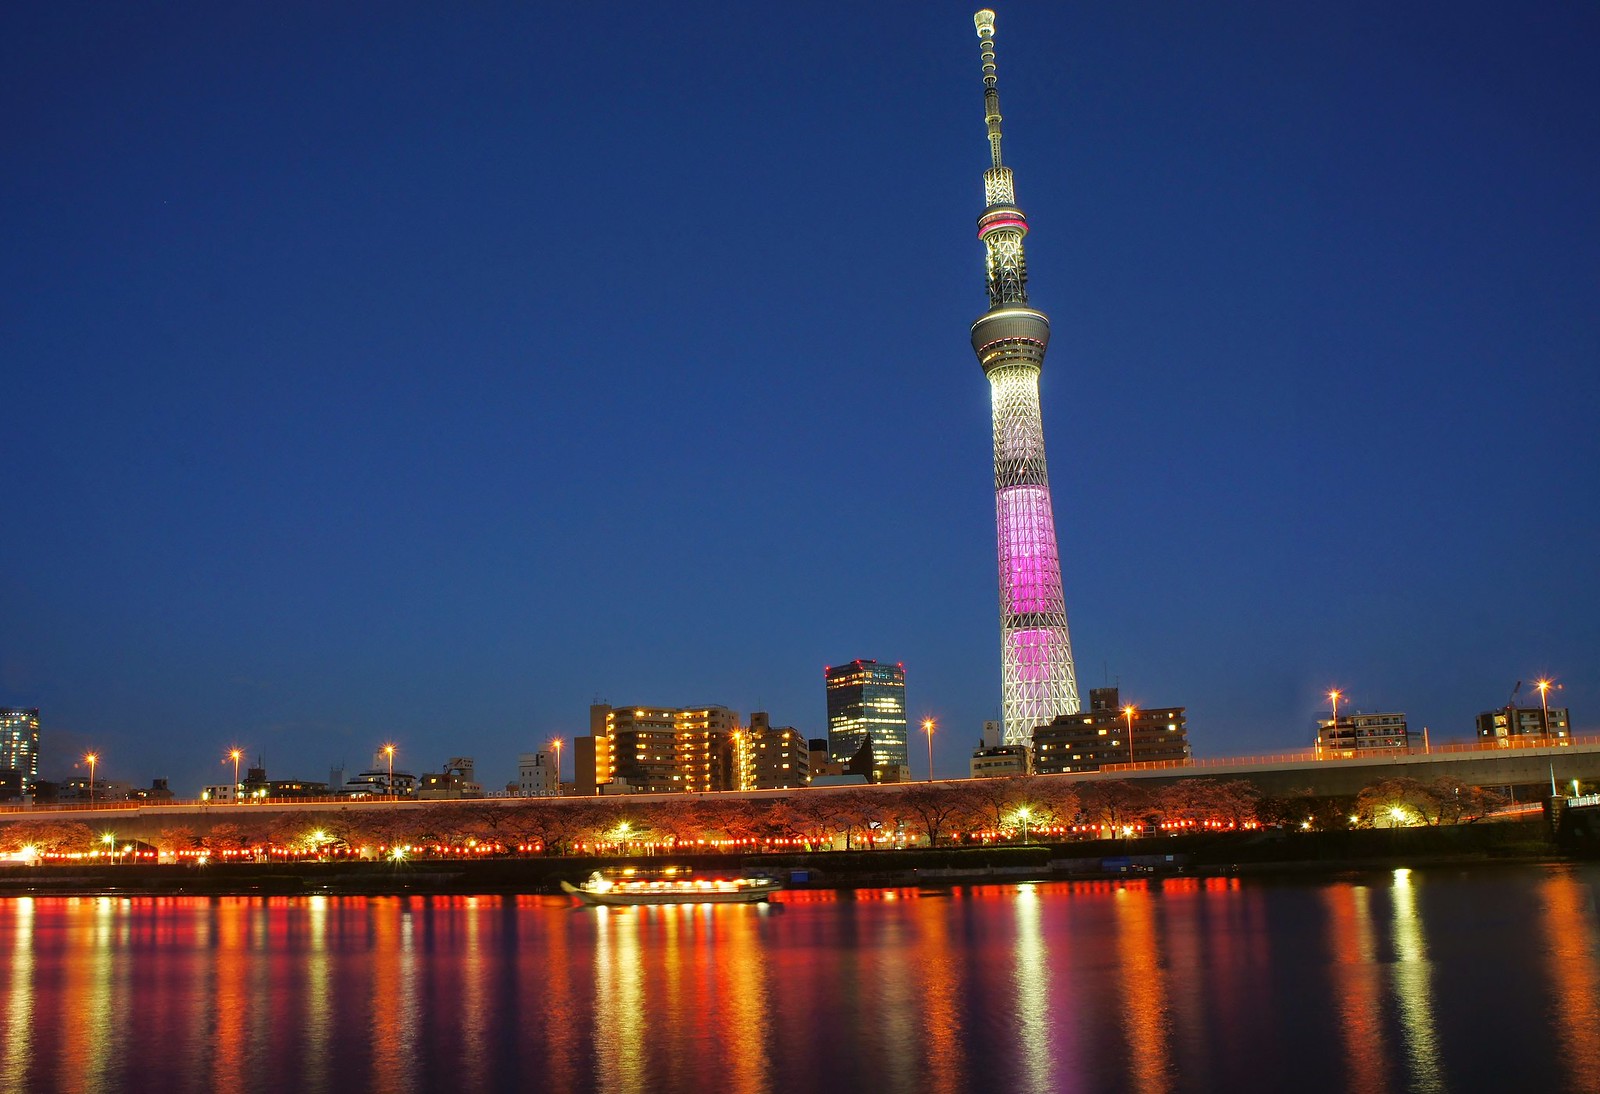 Tokyo Skytree and Cherry blossoms